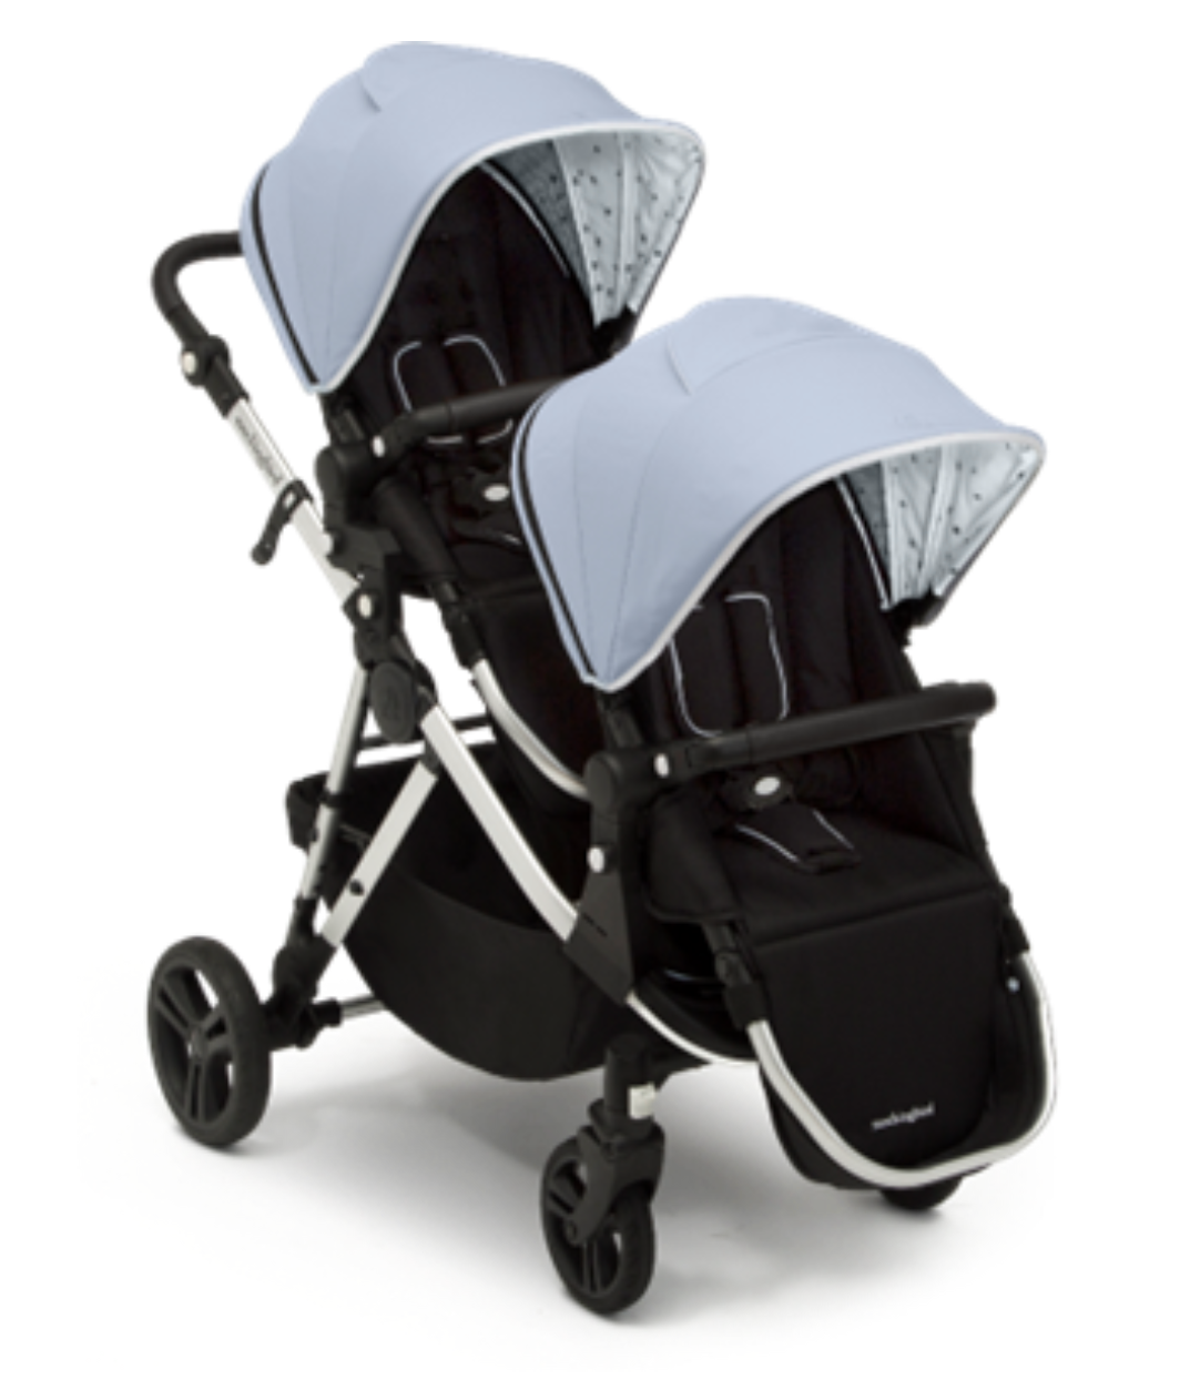 Mockingbird recalls over 100,000 strollers over concerns children could fall out